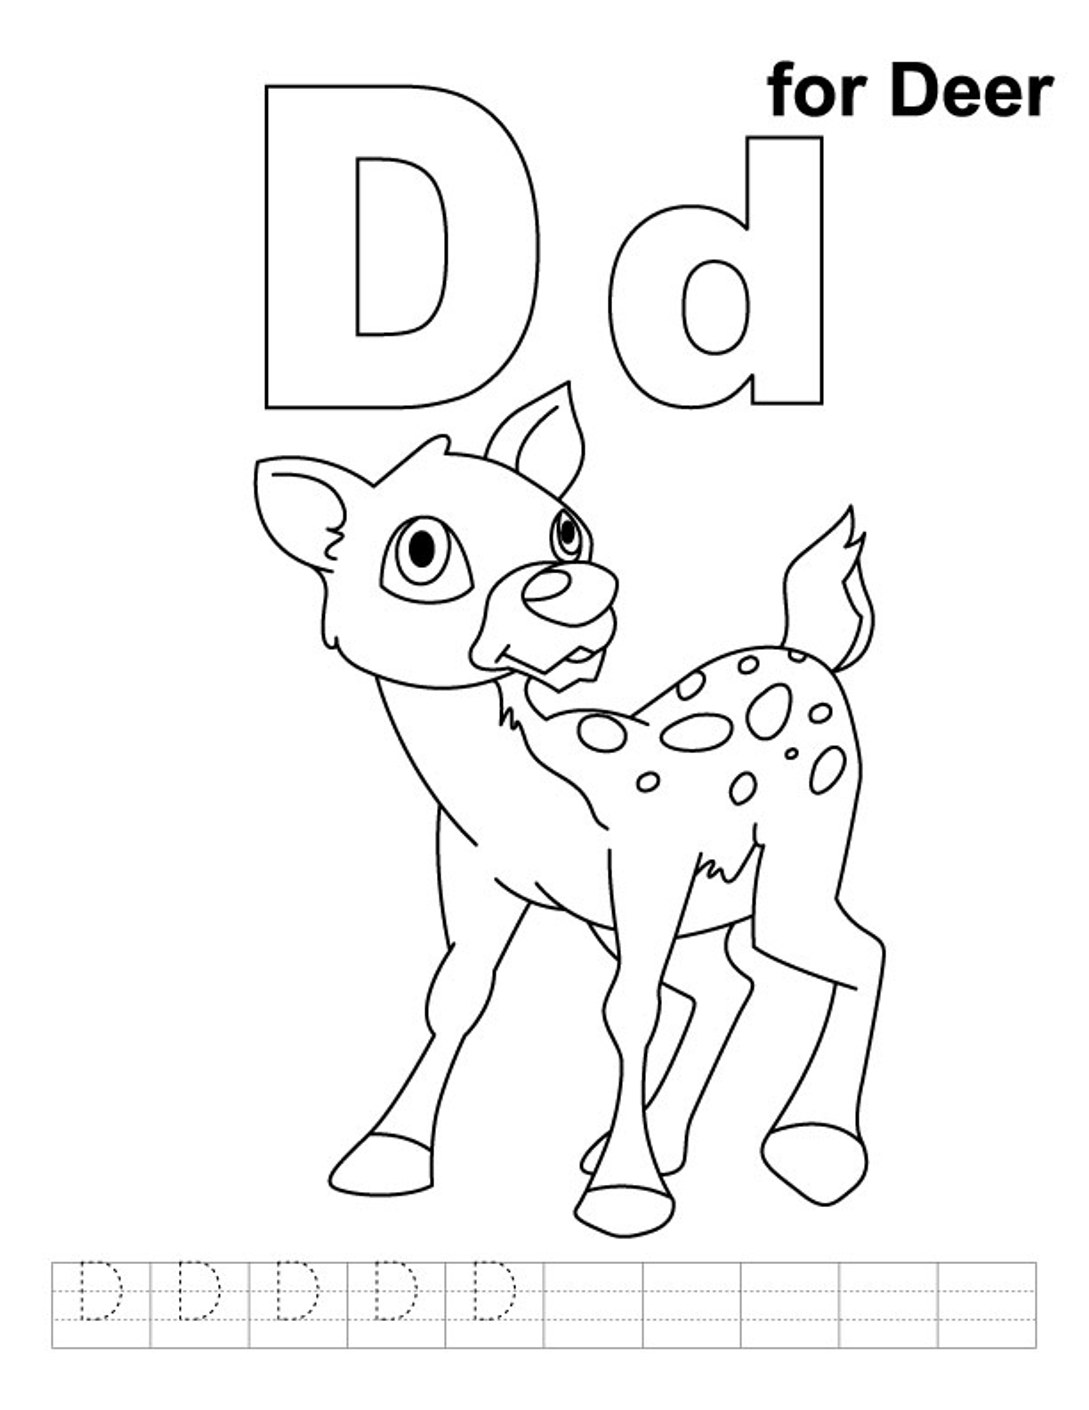 Animal Printable Alphabet S D For Deer1839a Coloring Page